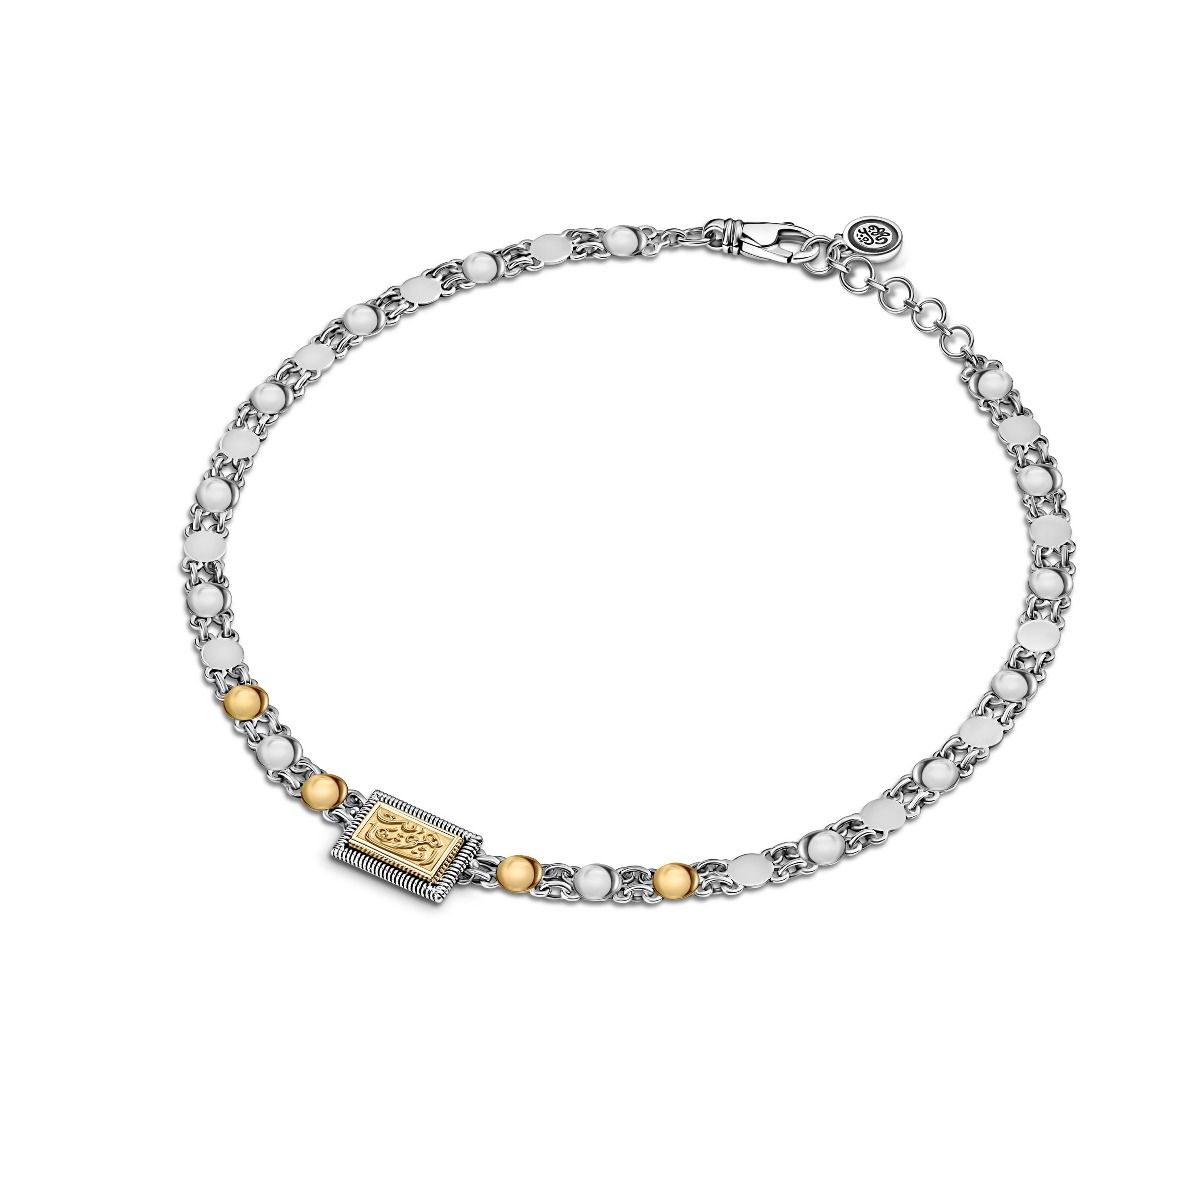 Enchantment Choker by Azza Fahmy - Designer Necklaces